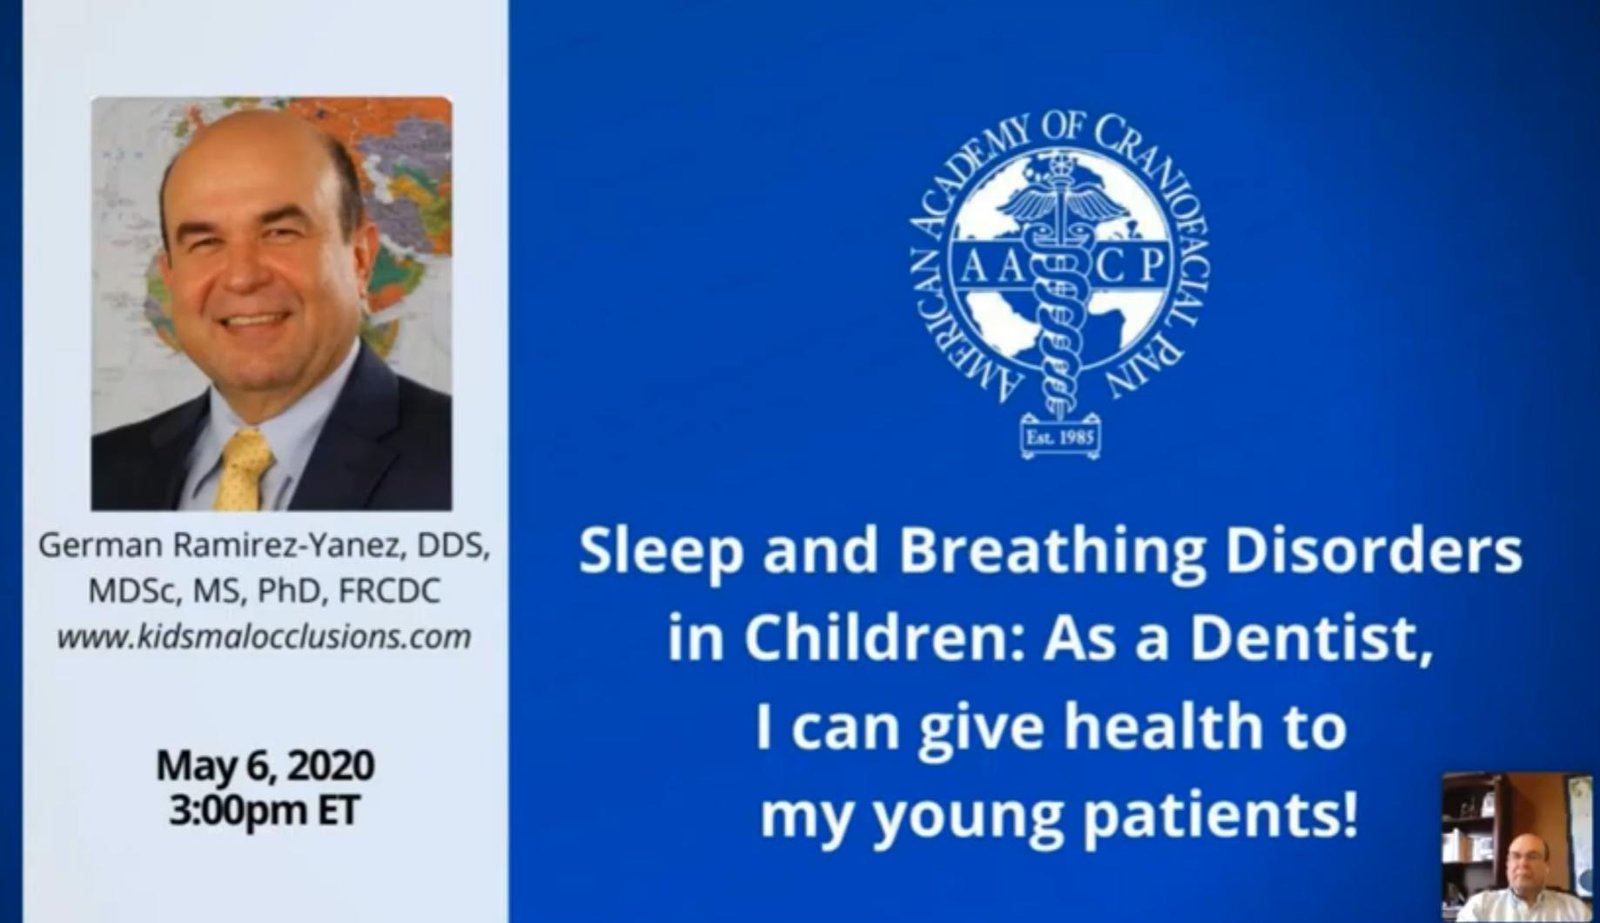  Sleep and breathing Disorders in children. Giving health to young patients